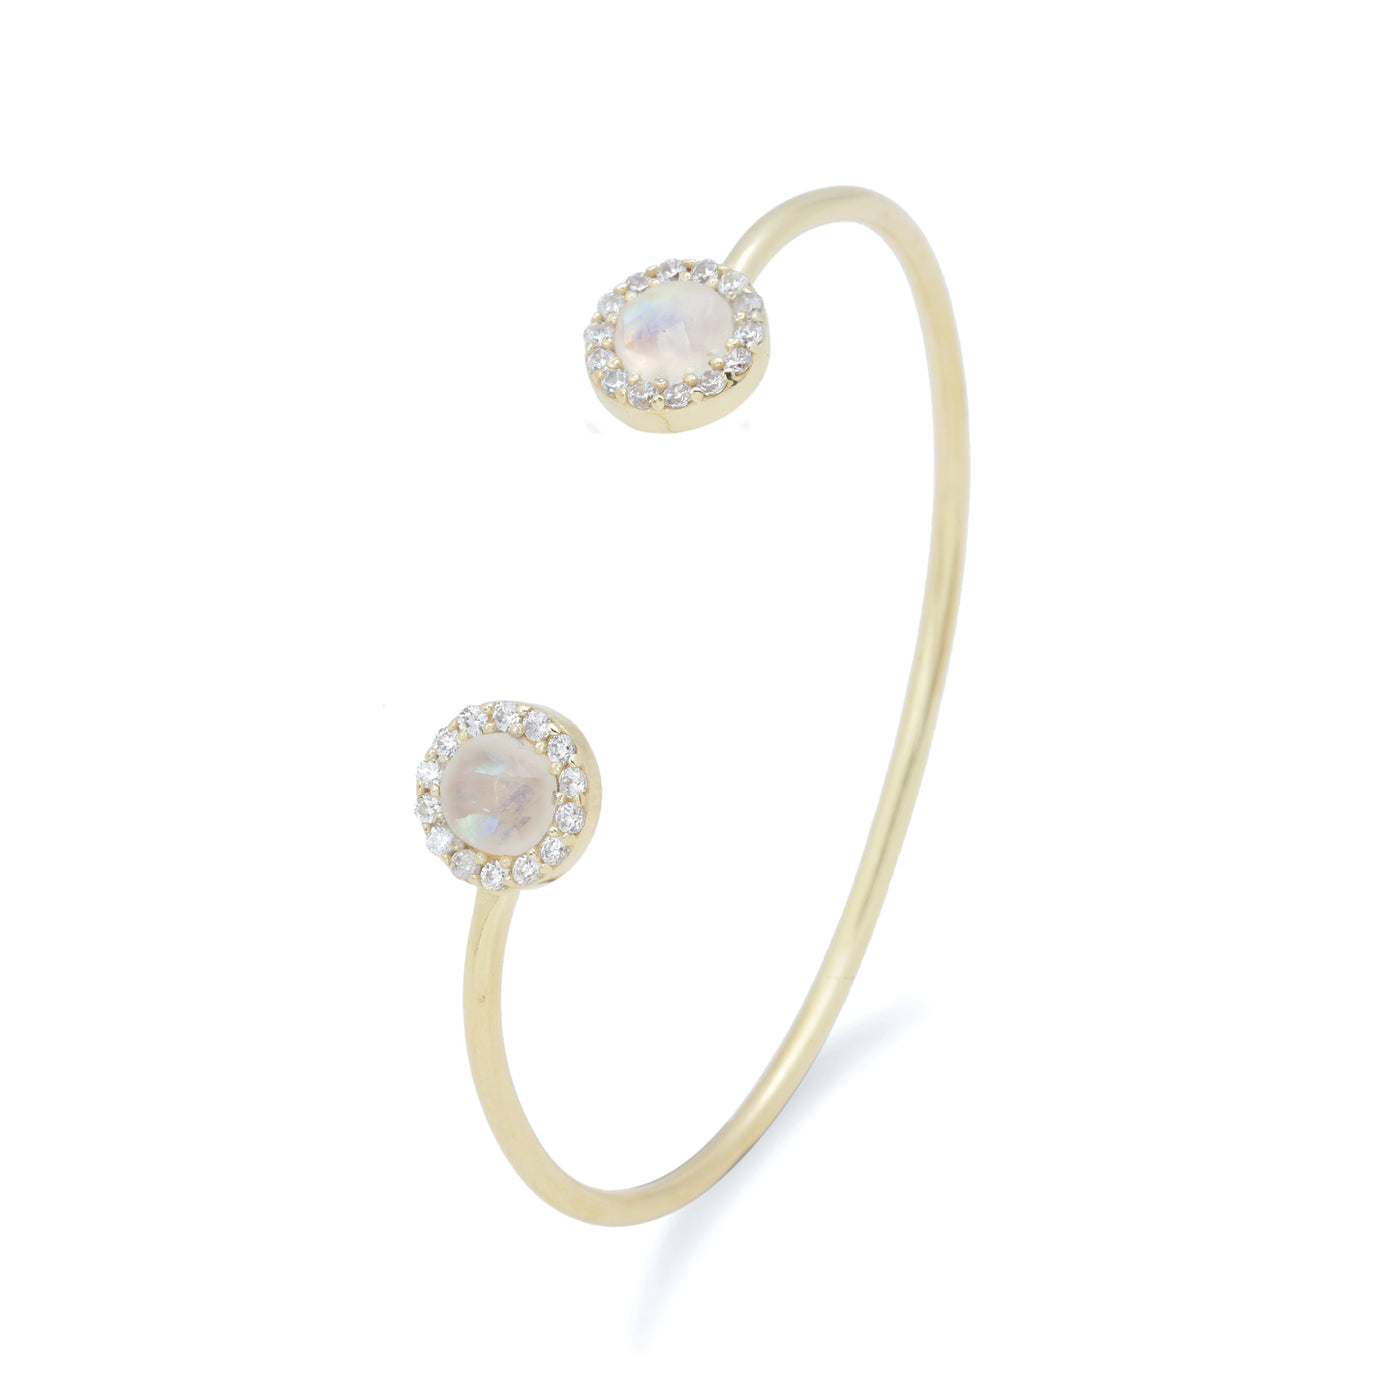 Nil open bangle with moonstone and white zircon